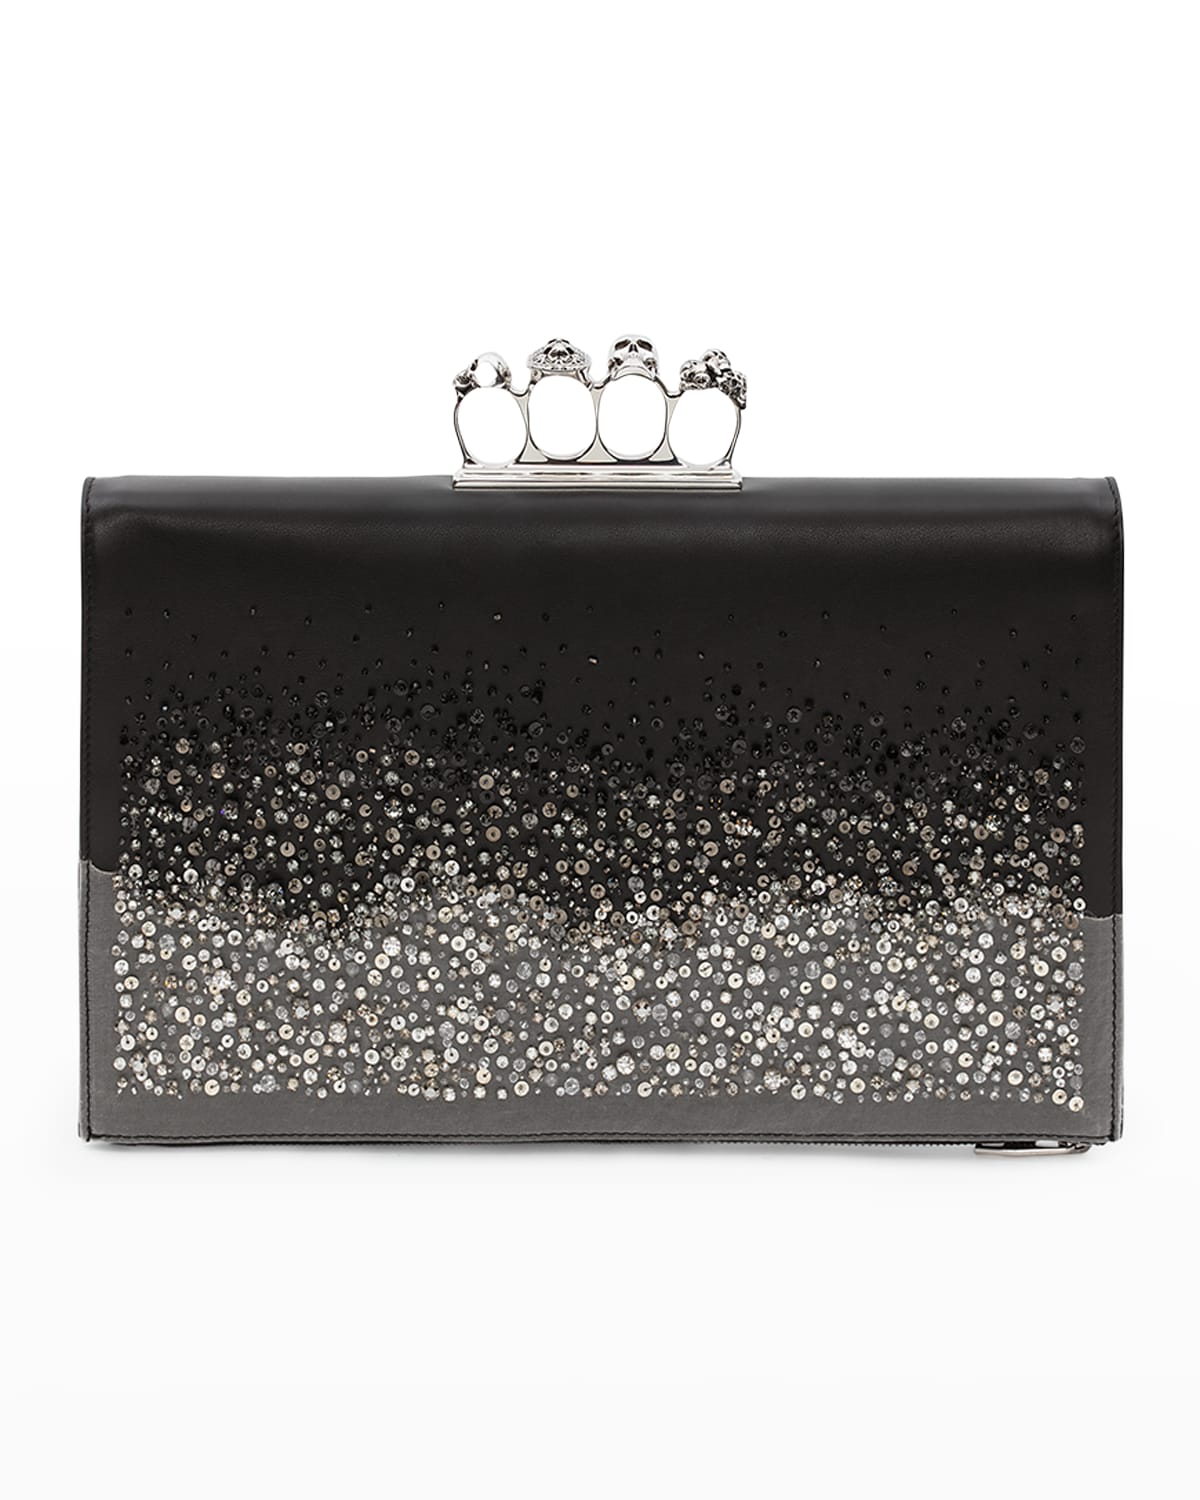 Alexander McQueen Men's Four Ring Embellished Leather Zip Pouch Bag